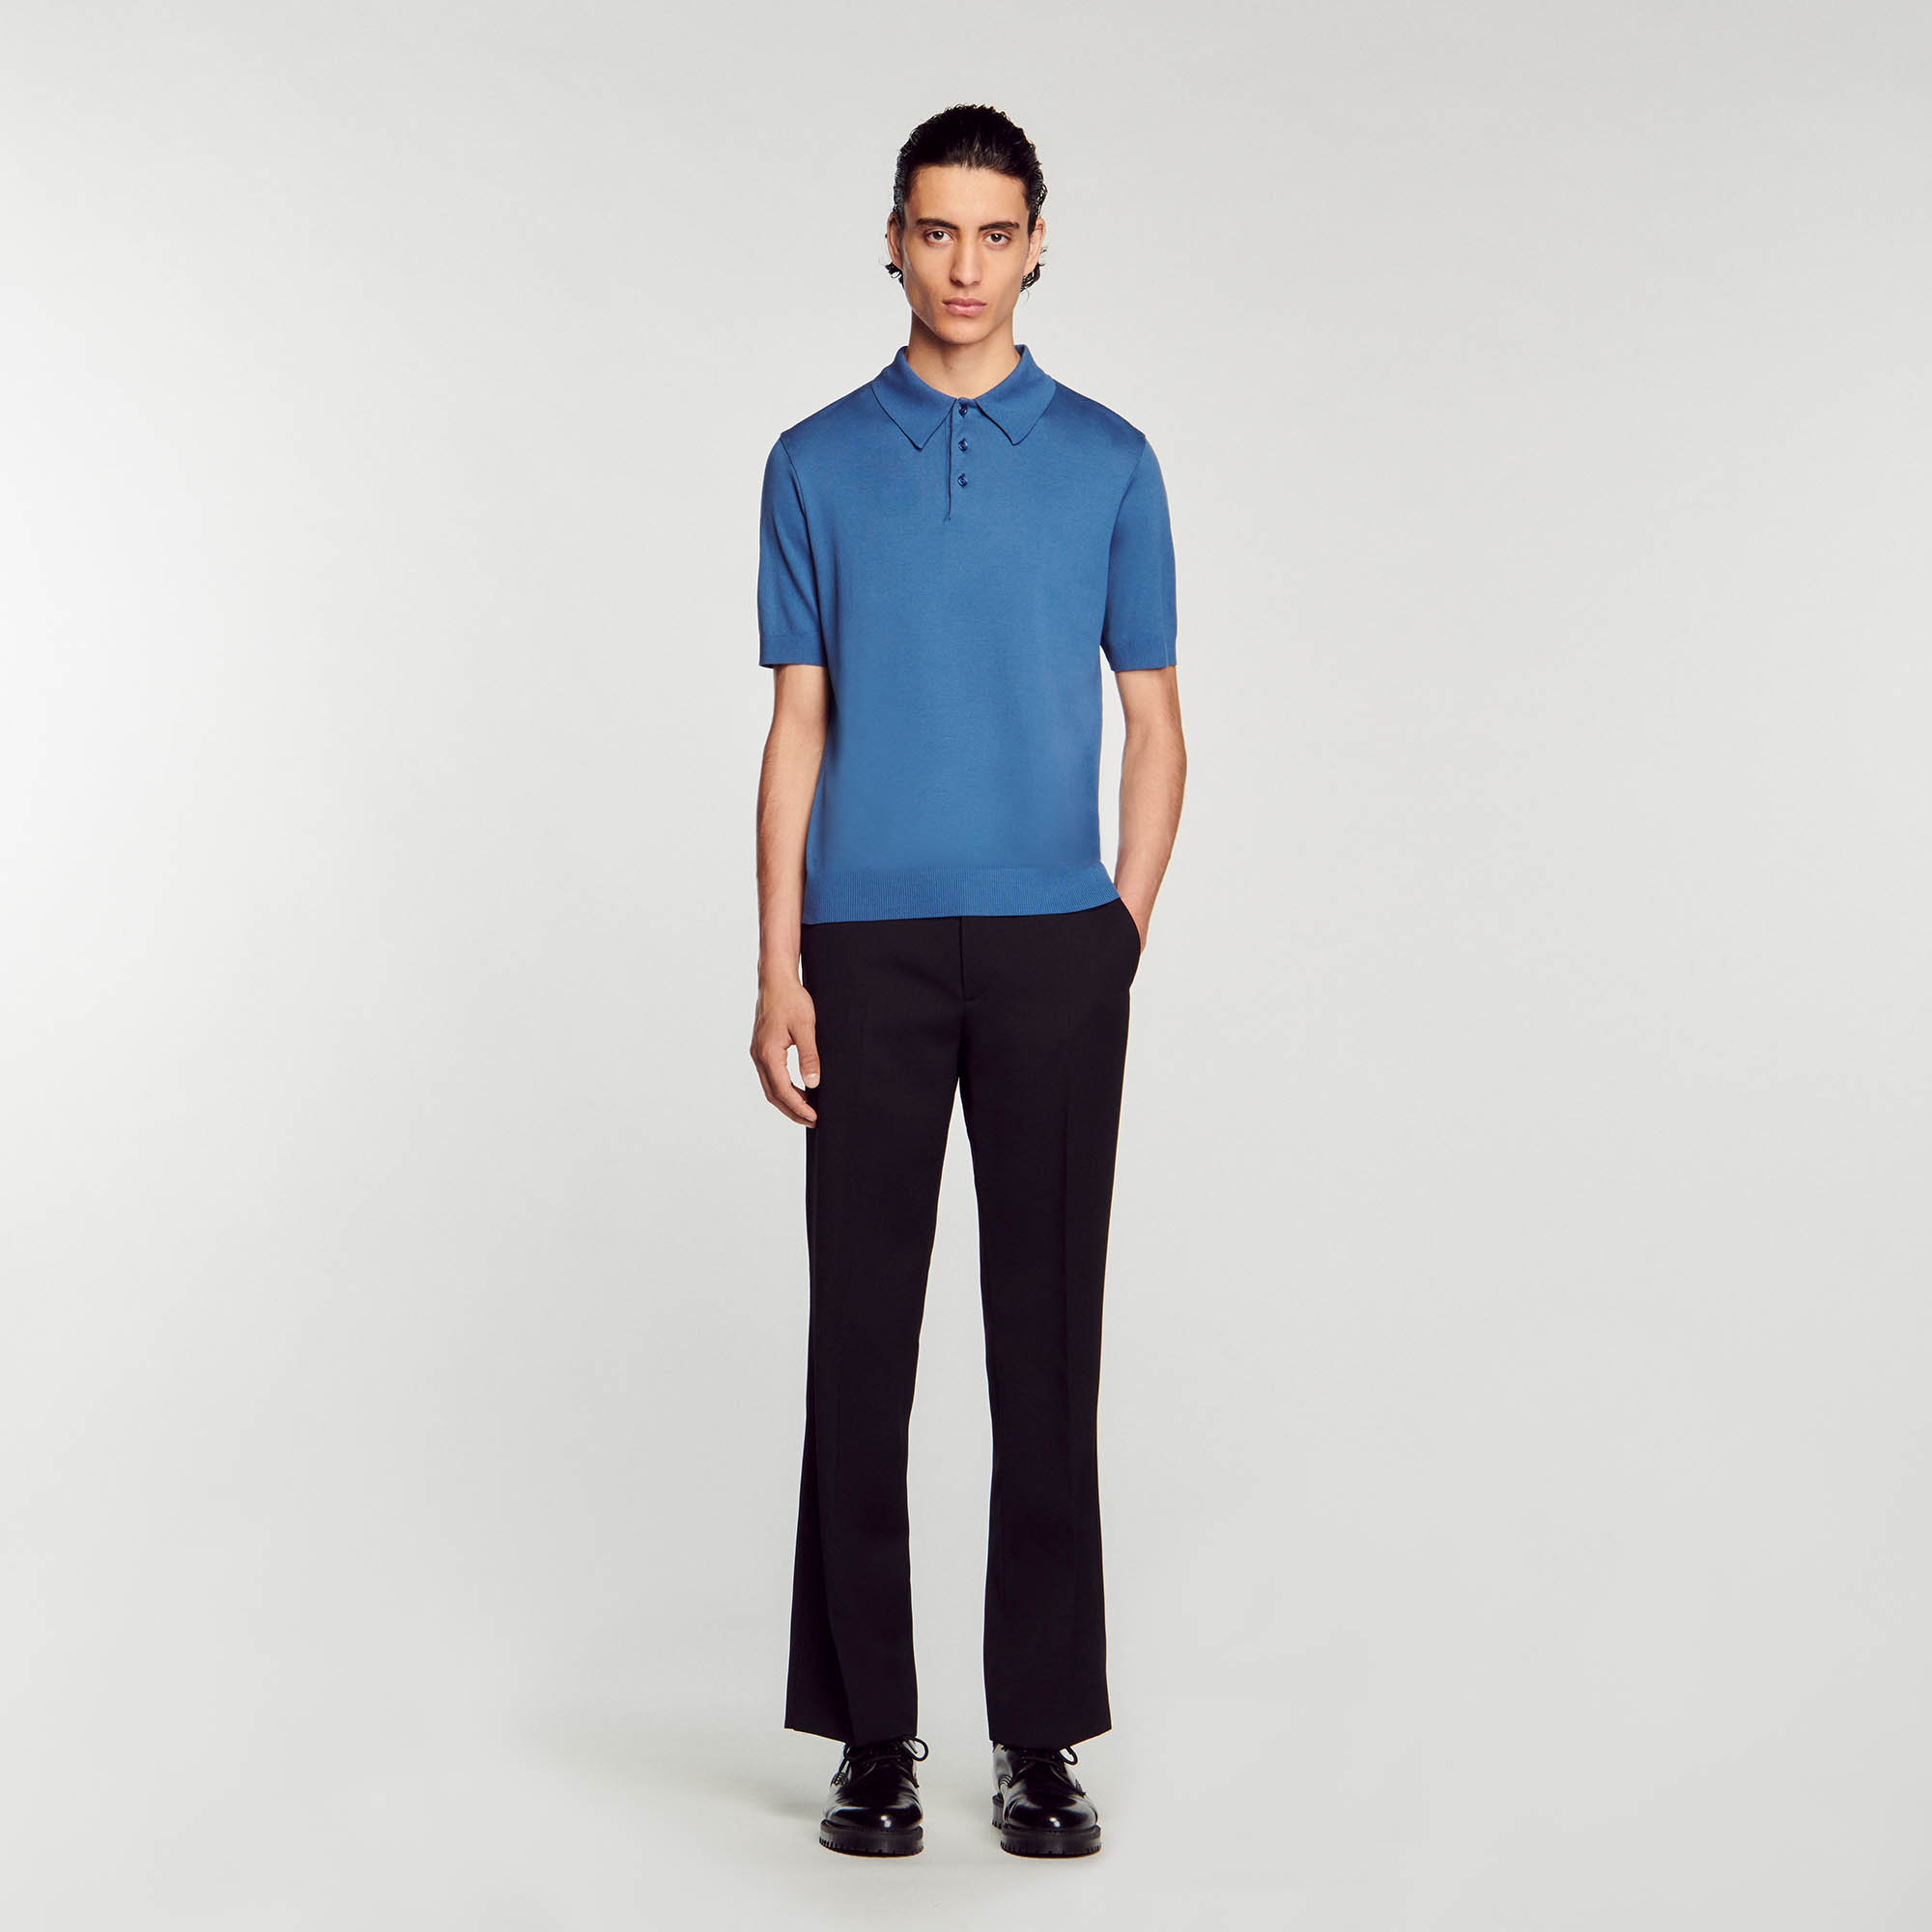 Sandro cotton Cotton polo shirt with button-down collar, short sleeves and ribbed trim